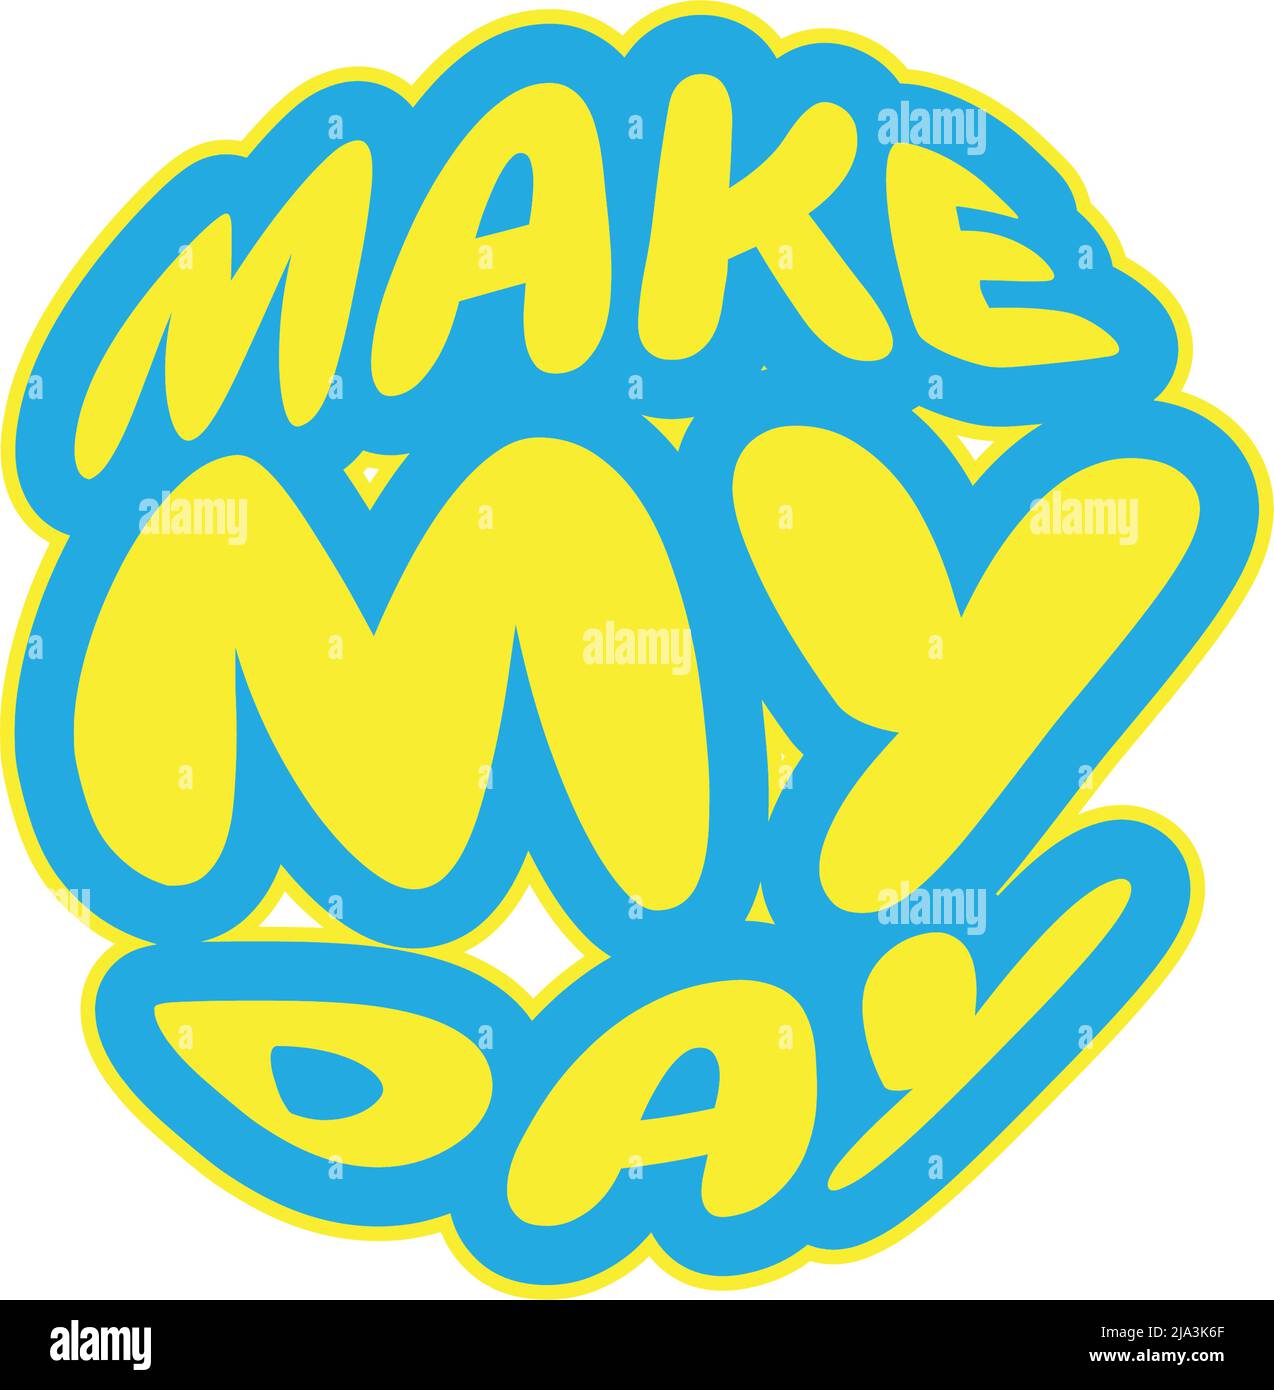 Make my day, vector. Motivational inspirational positive quotes. Wording design isolated on white background. T shirt design Stock Vector